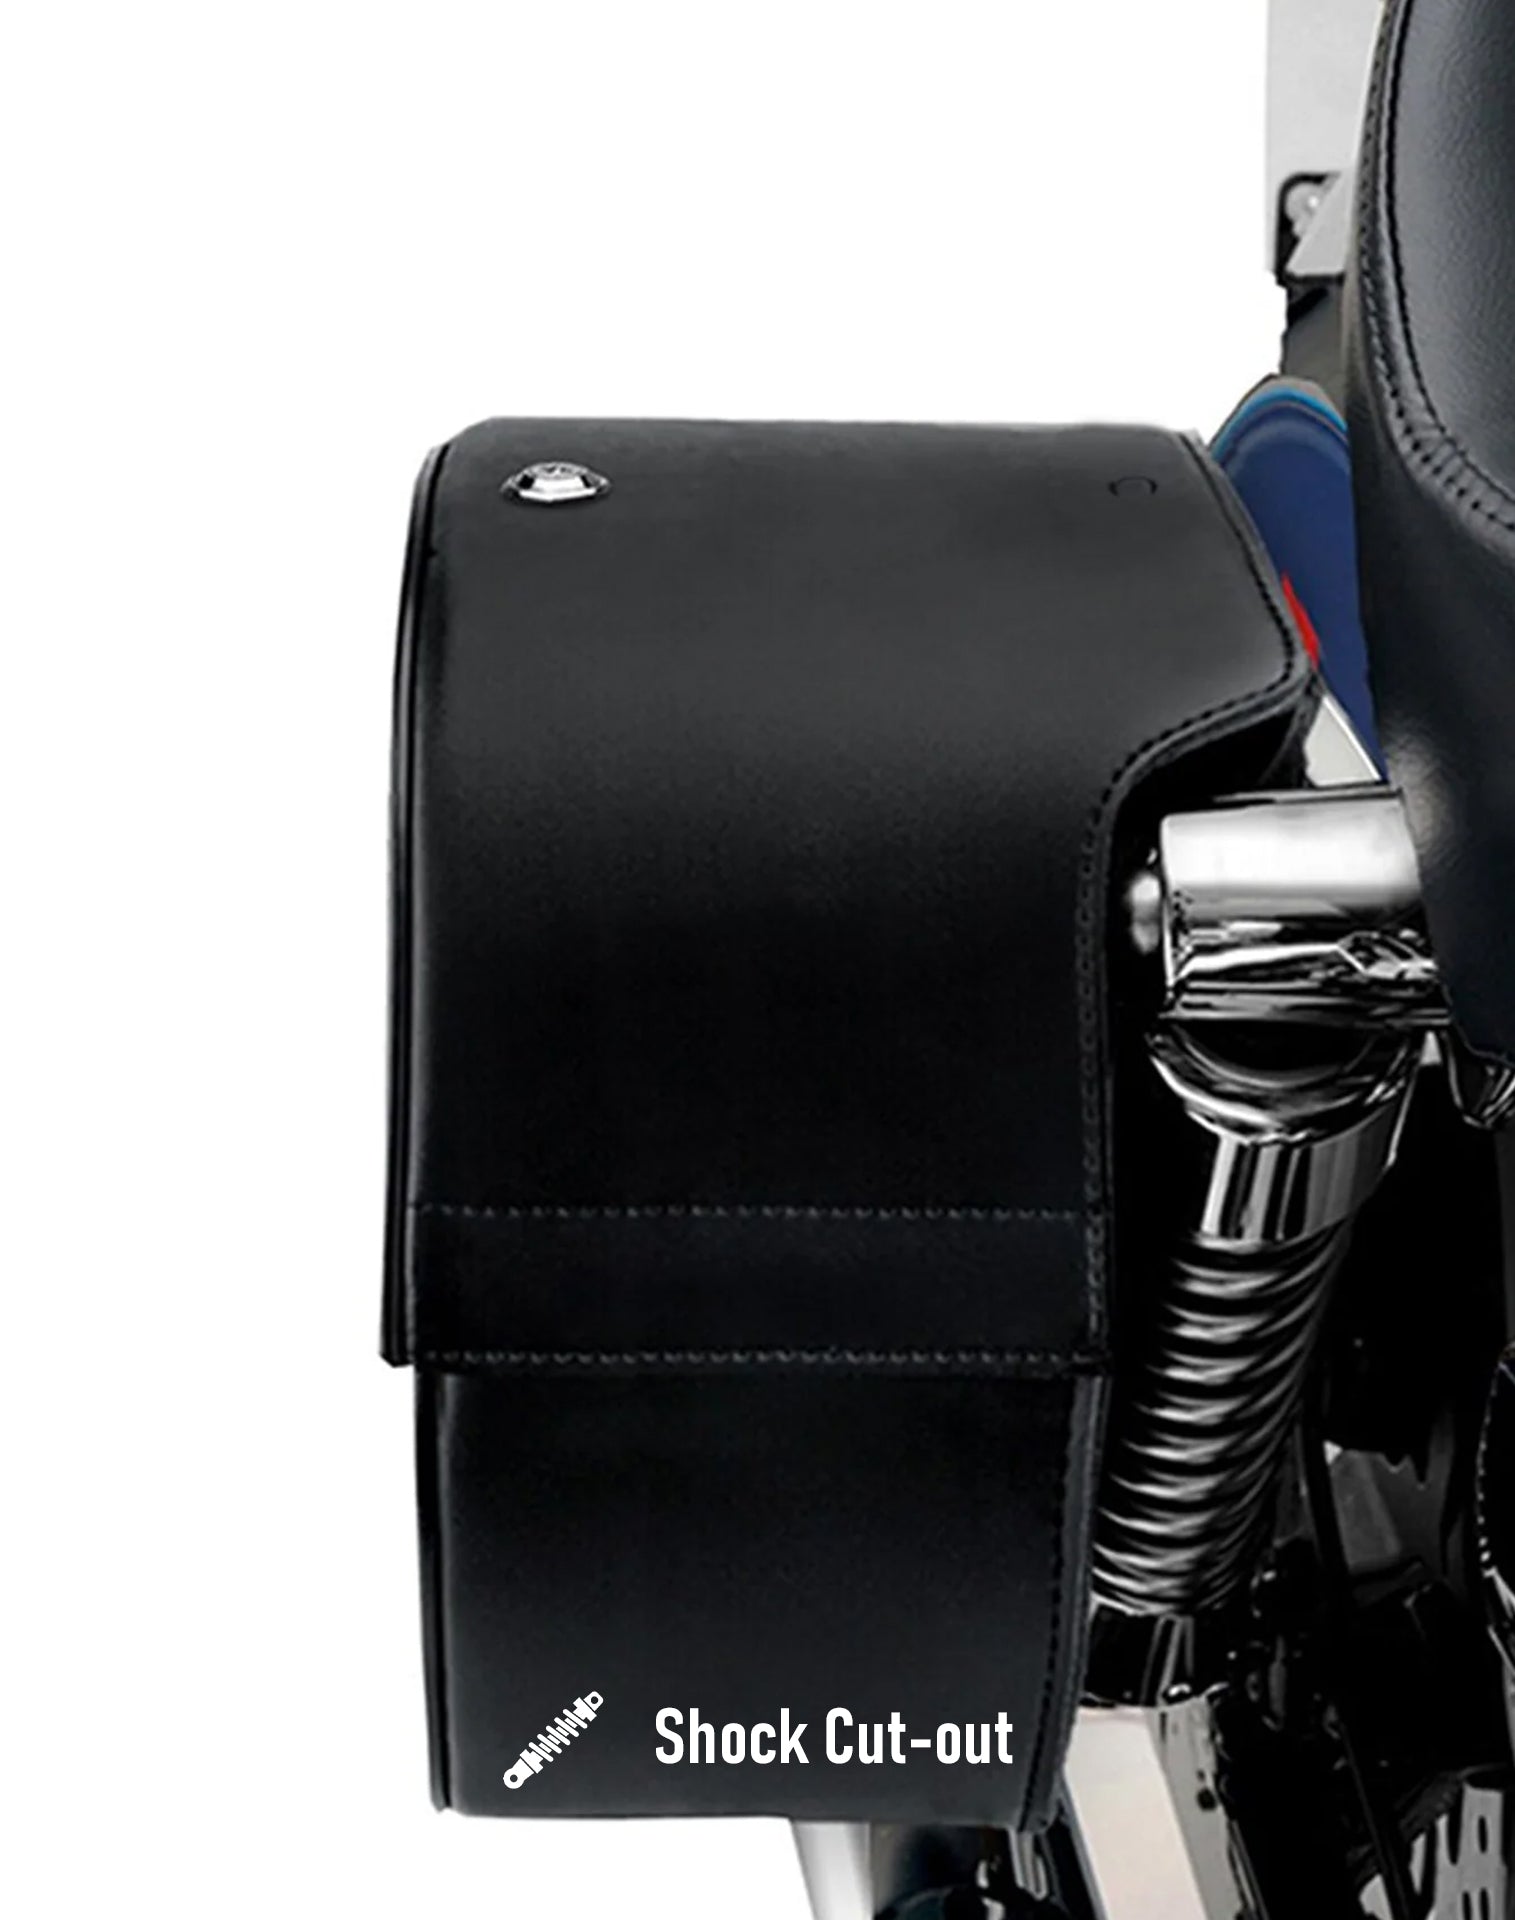 Viking Warrior Large Triumph Rocket Iii Classic Shock Cut Out Leather Motorcycle Saddlebags Hard Shell Construction